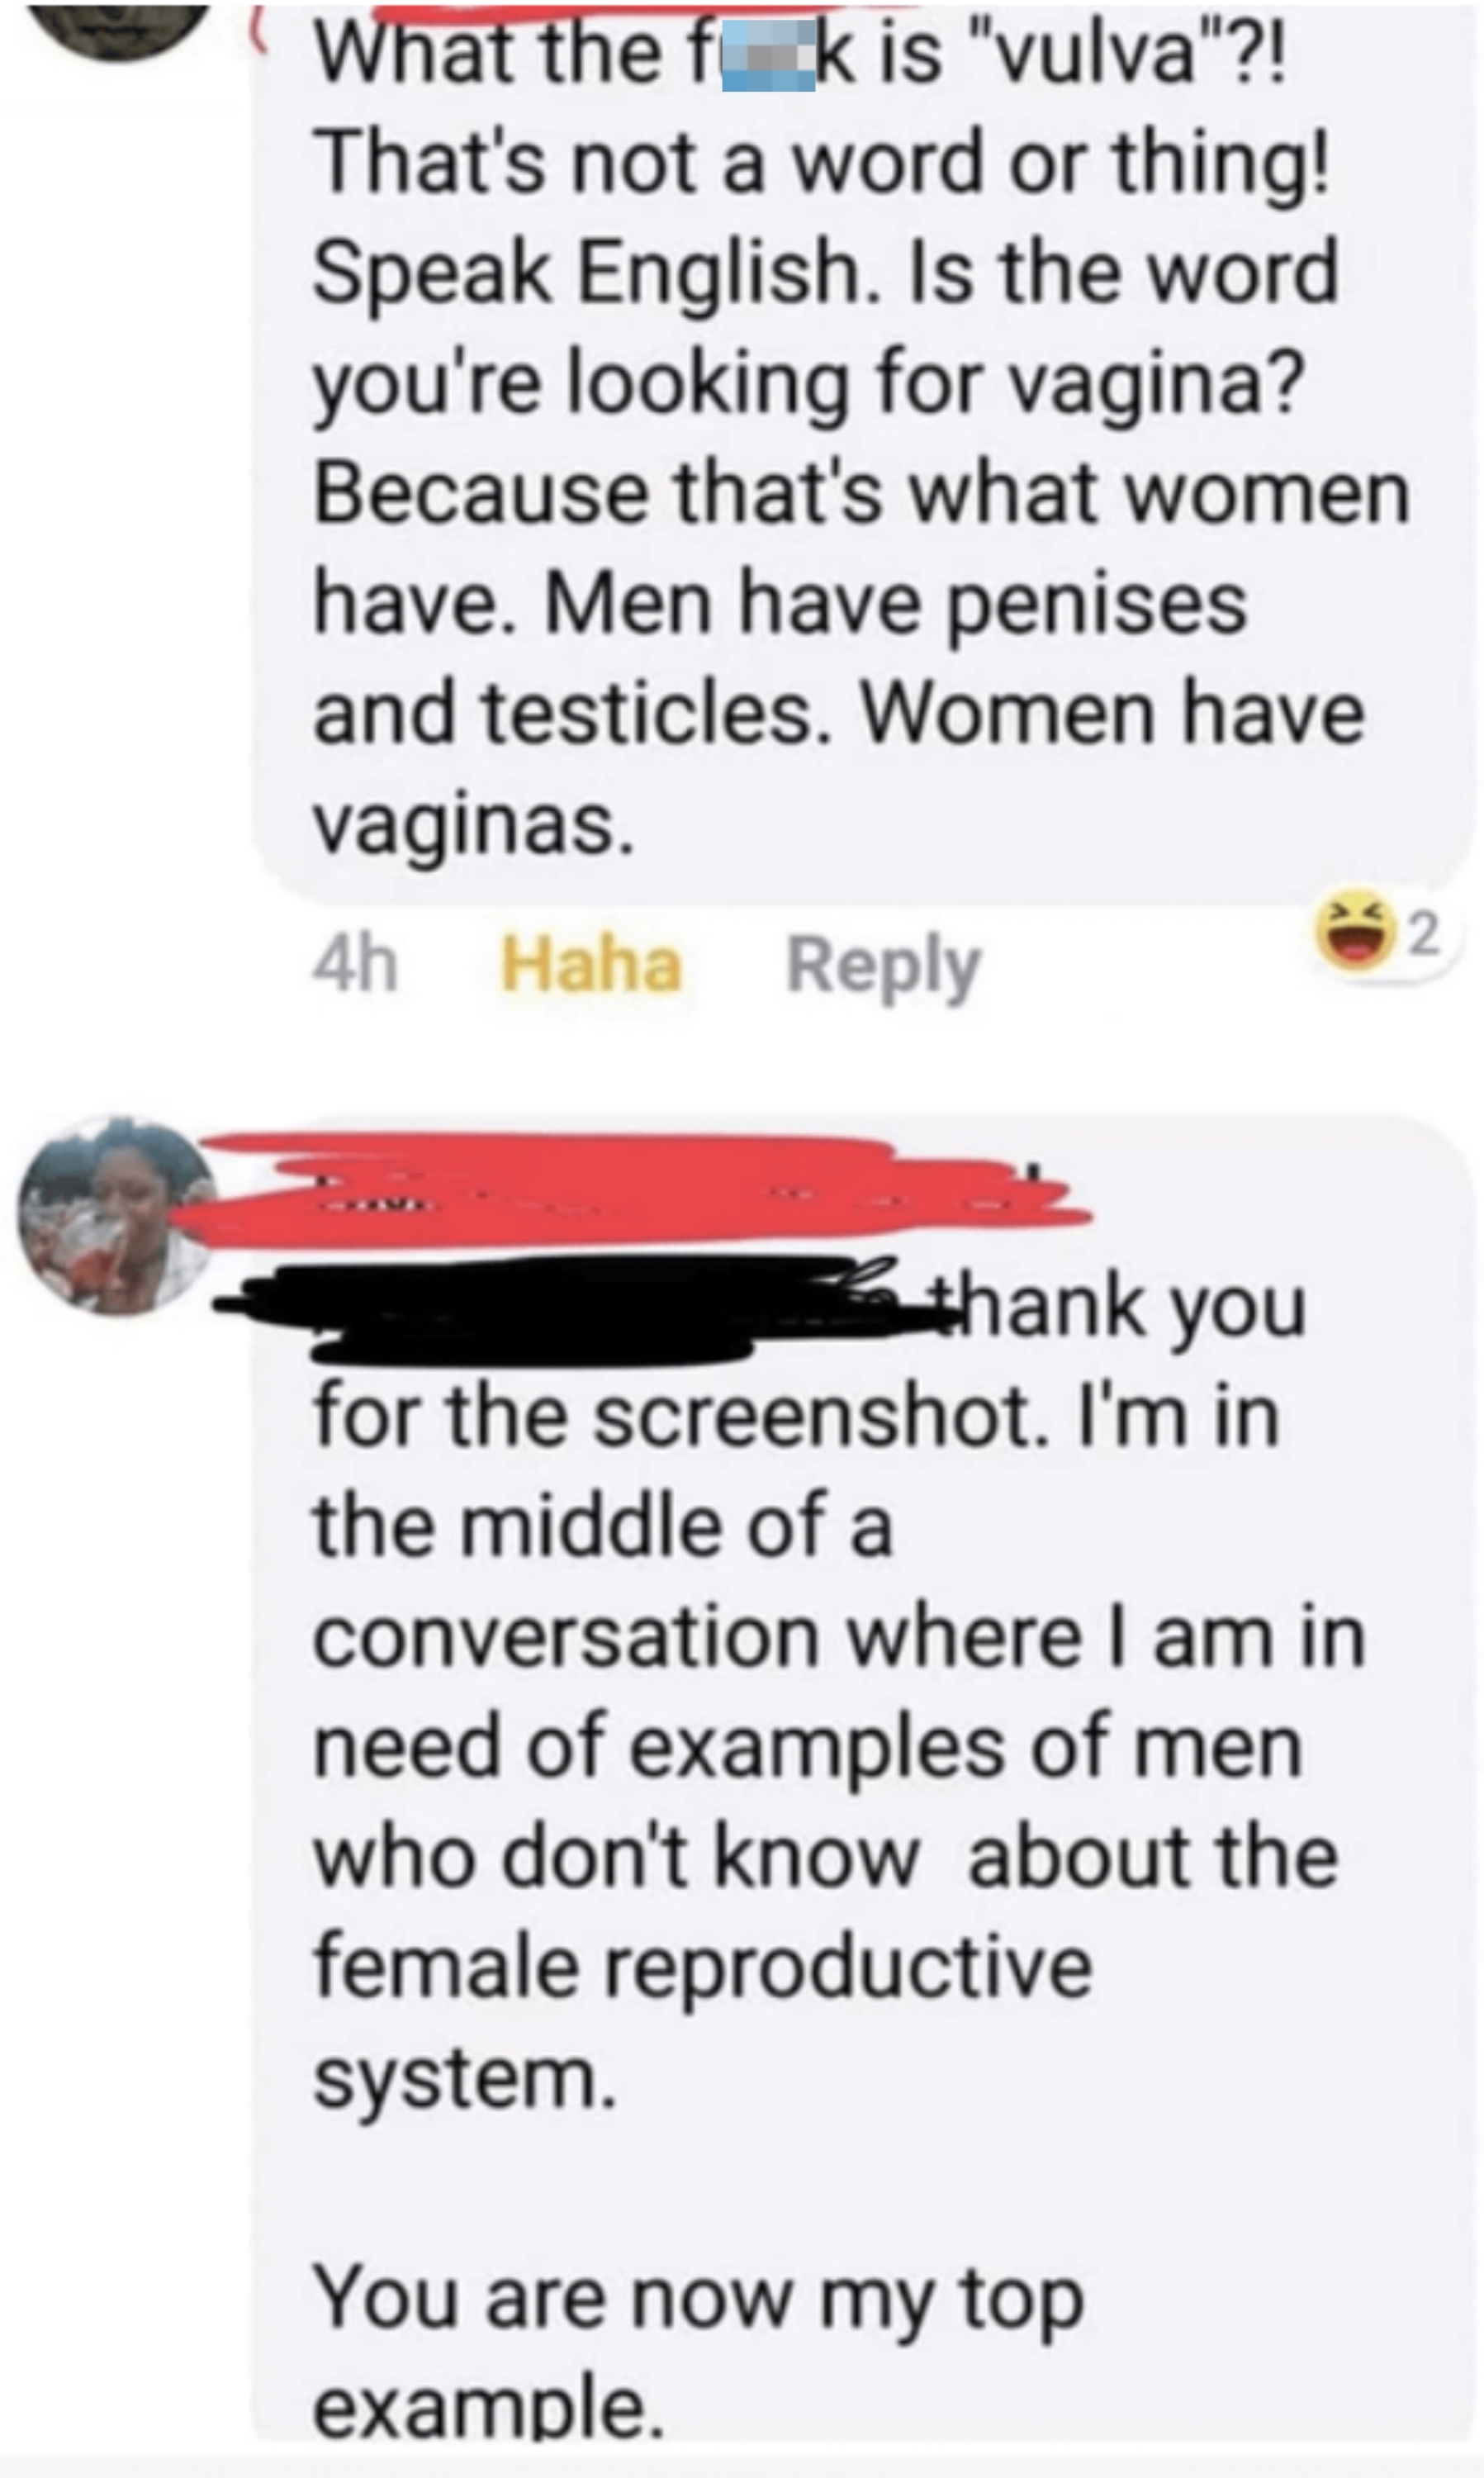 The image contains a screenshot of a text conversation discussing the misunderstanding of the term &quot;vulva&quot; with humorous tone